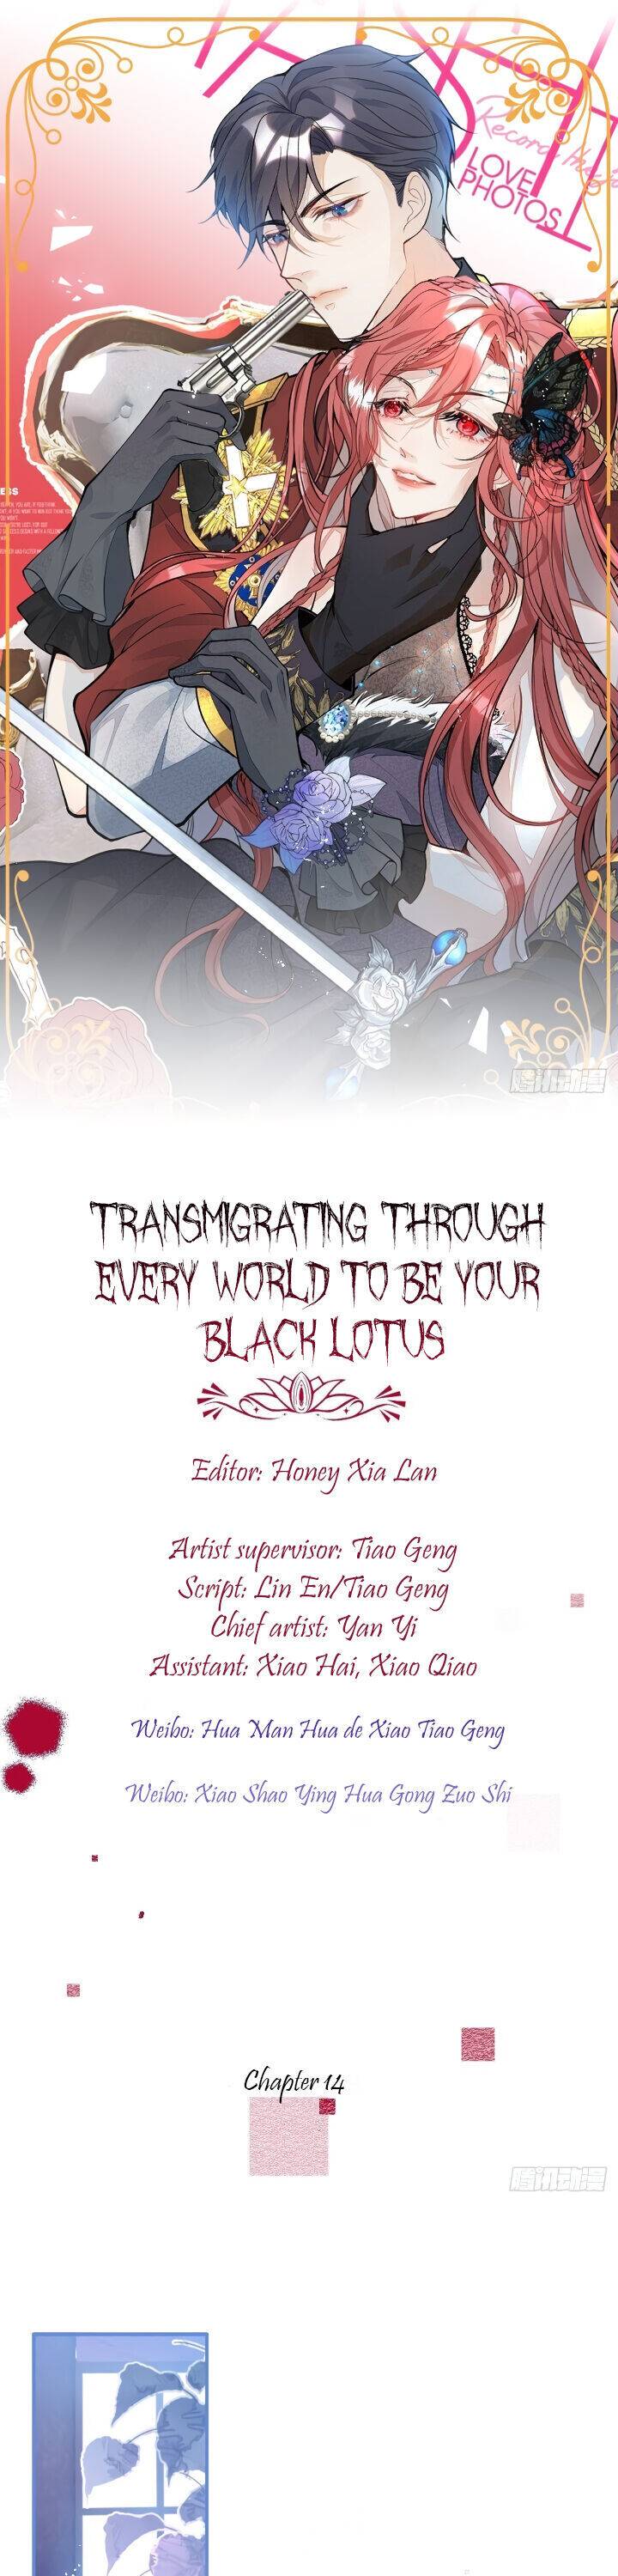 Transmigrating Through Every World to Be Your Black Lotus Chapter 14 - Page 0